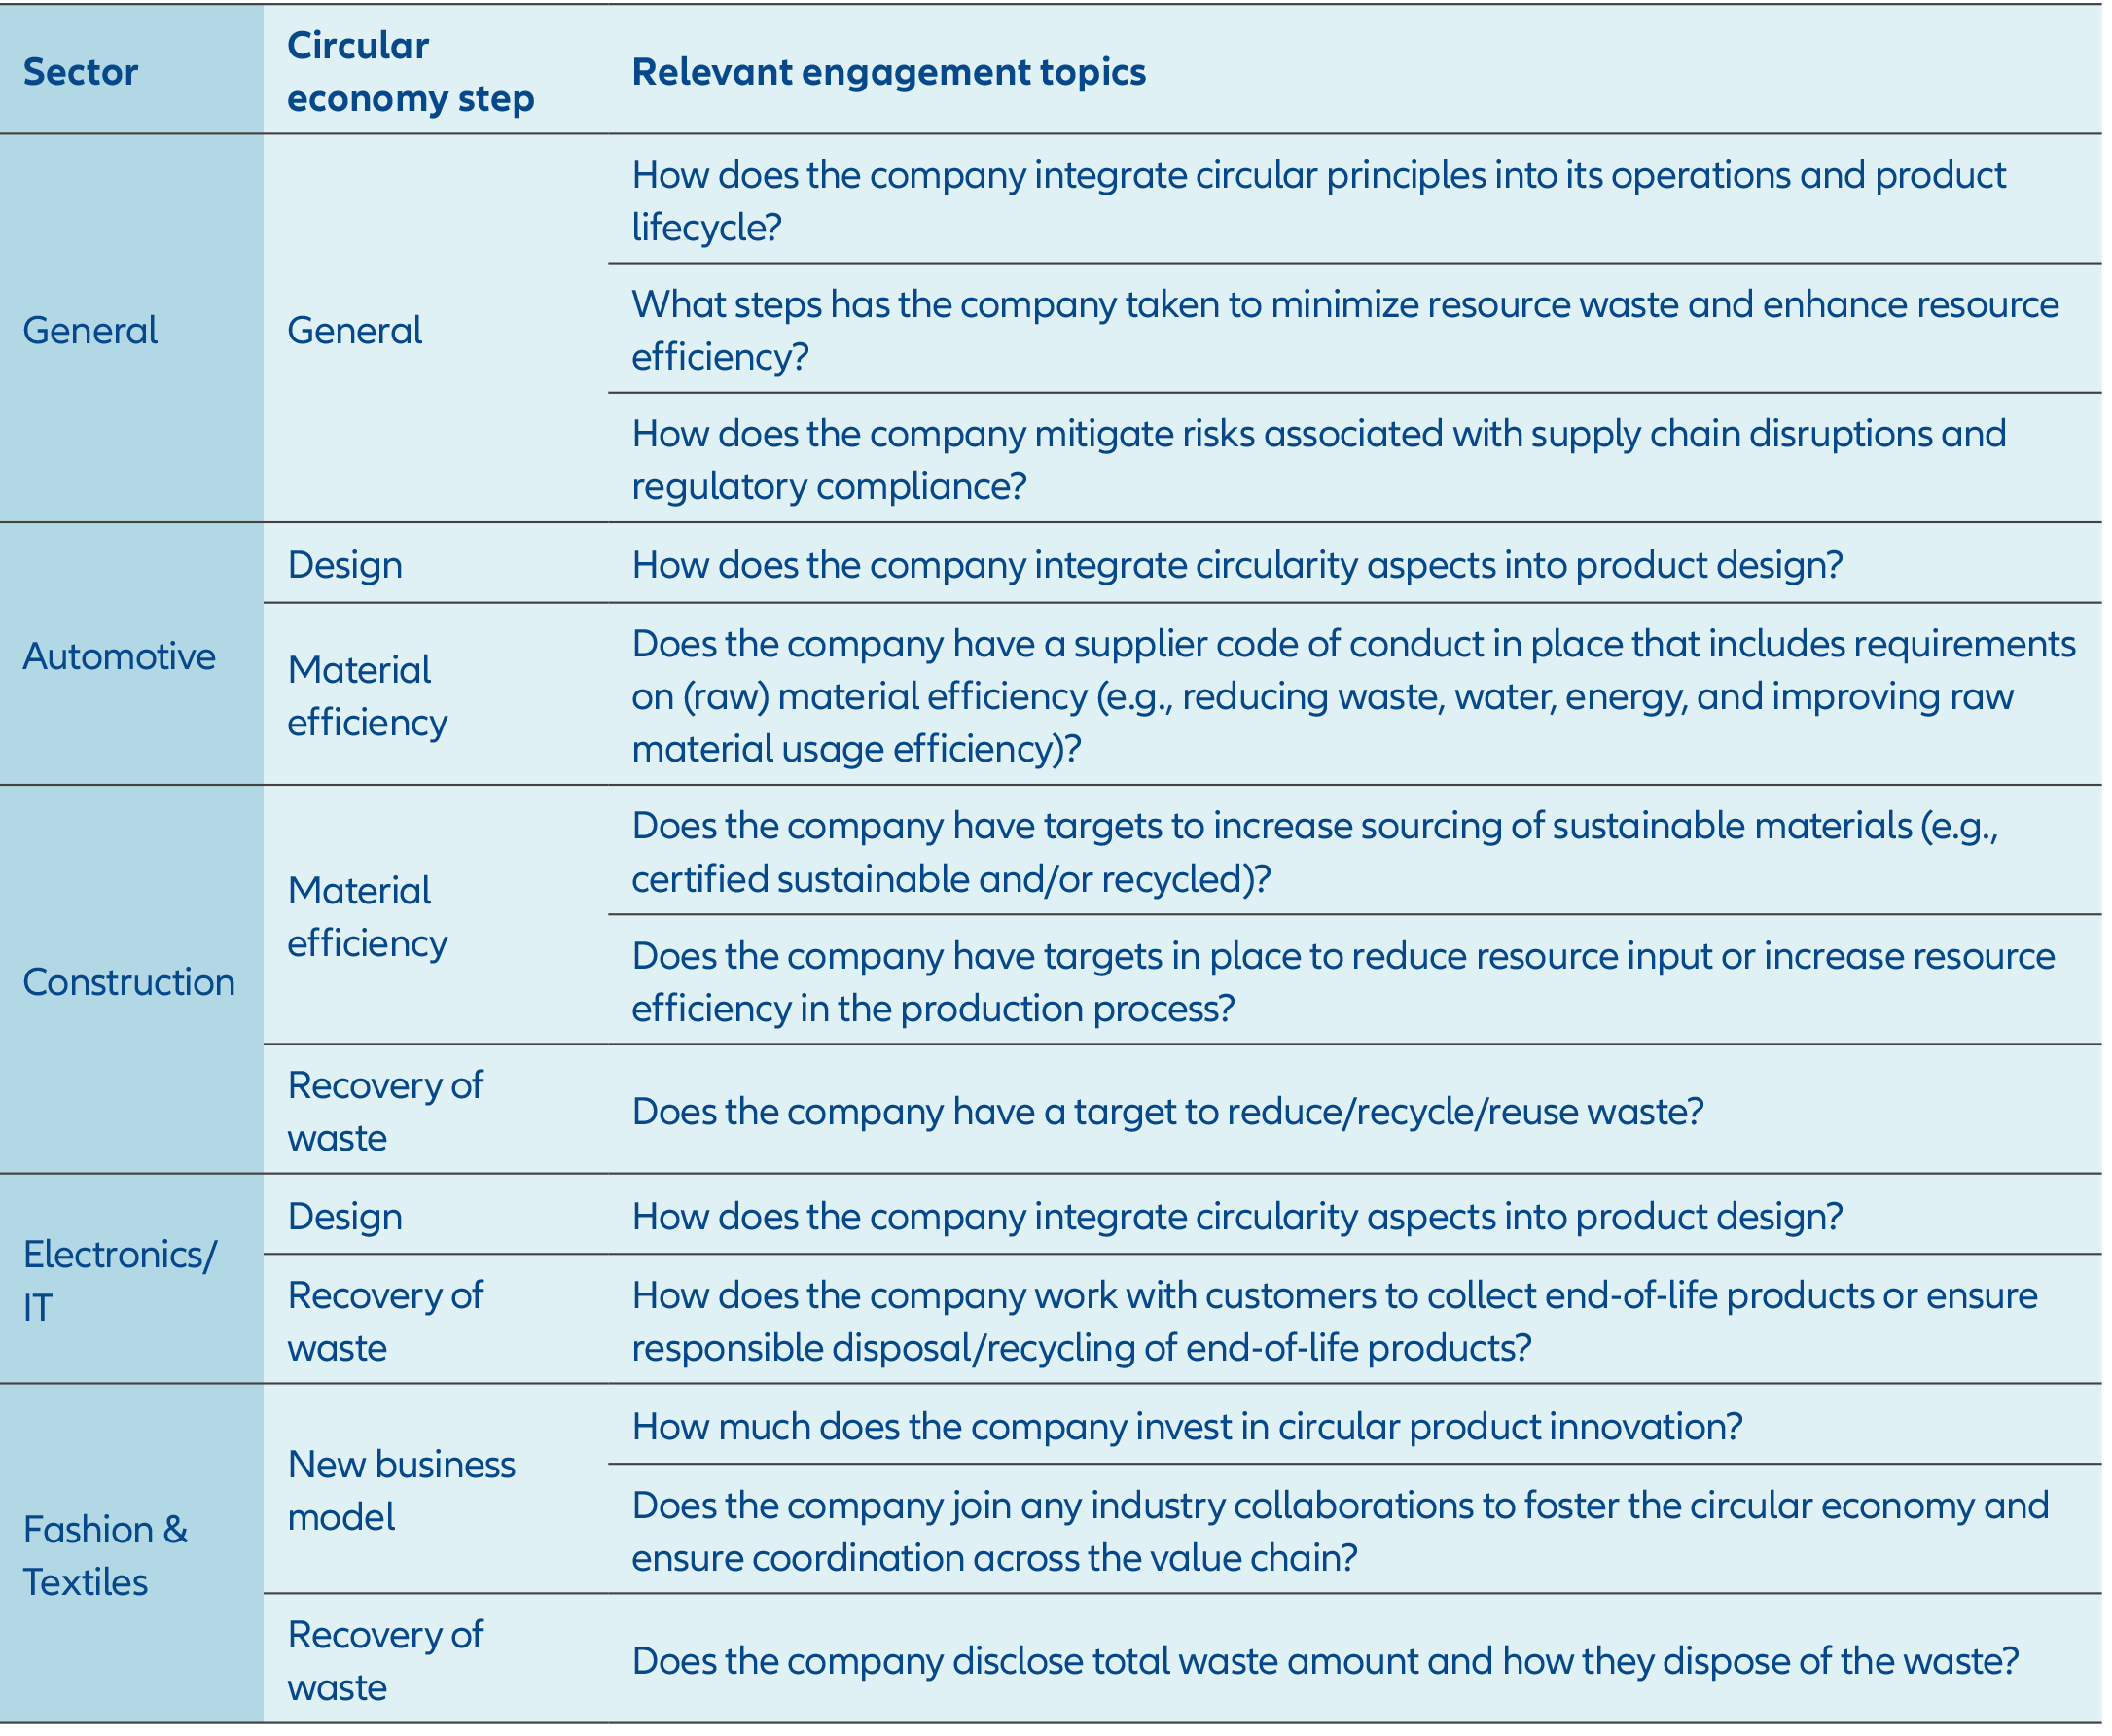 Exhibit 9: Examples of engagement questions on the CE for select sectors